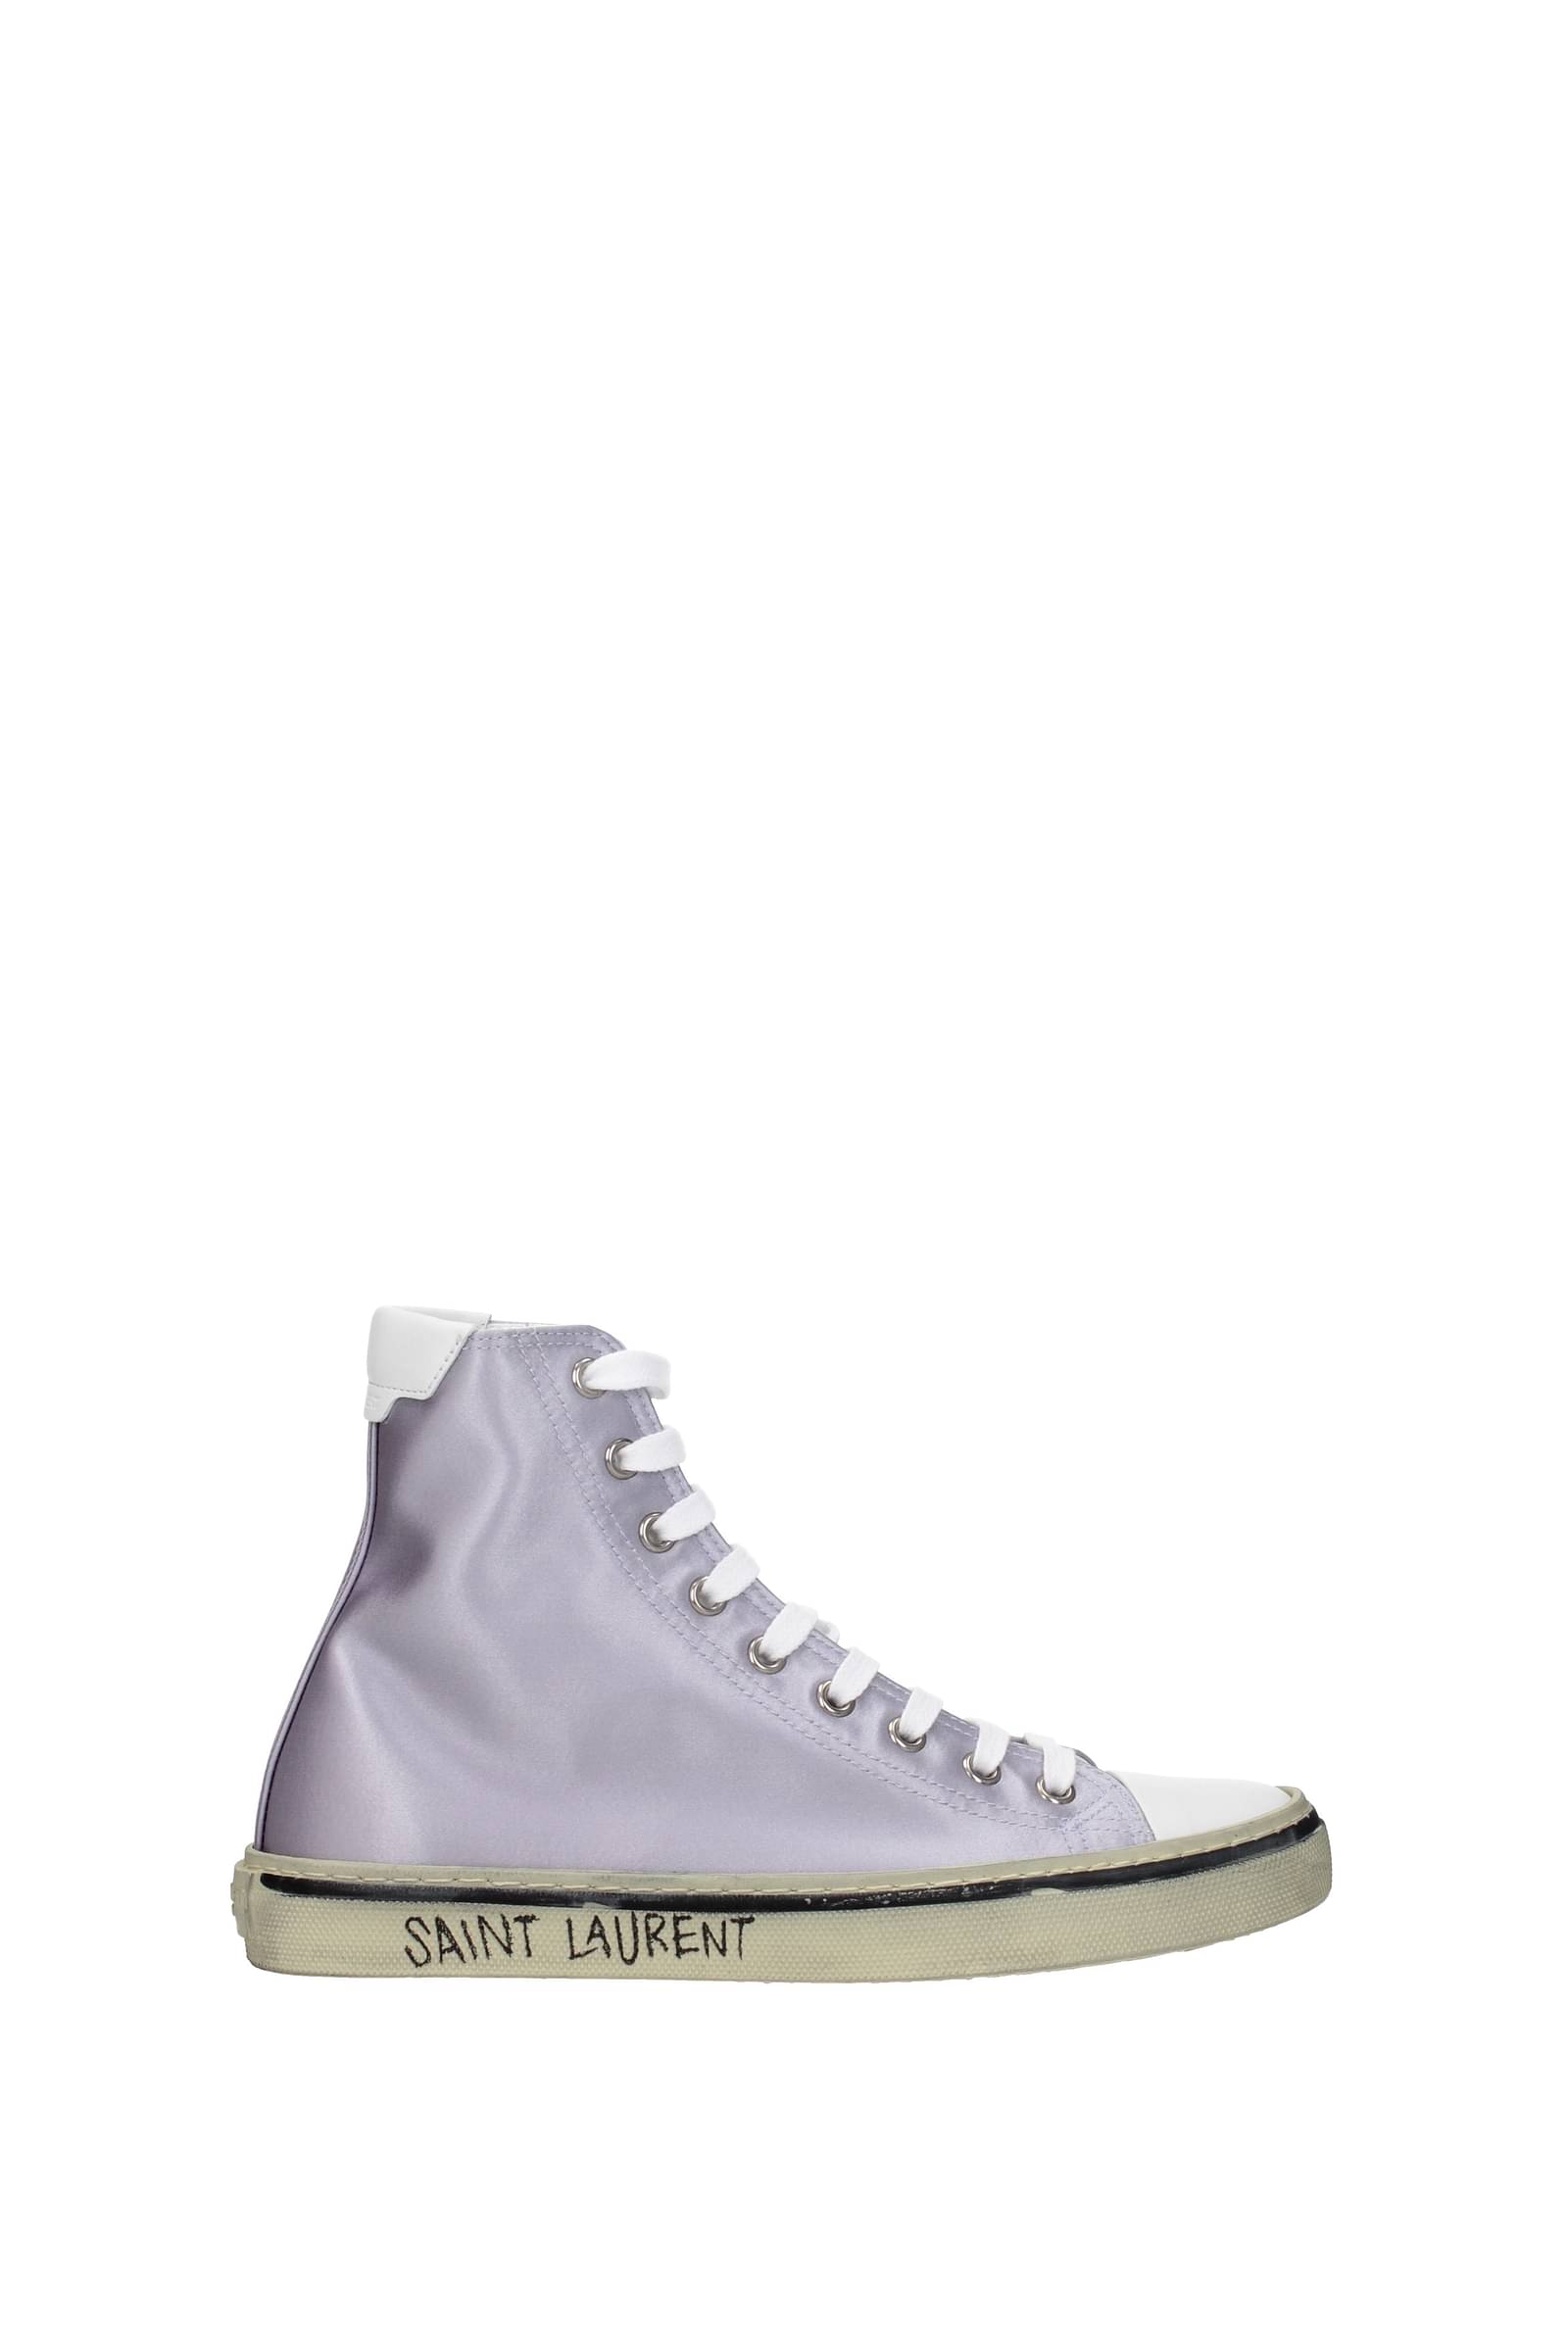 SAINT LAURENT Malibu distressed leather high-top sneakers | NET-A-PORTER